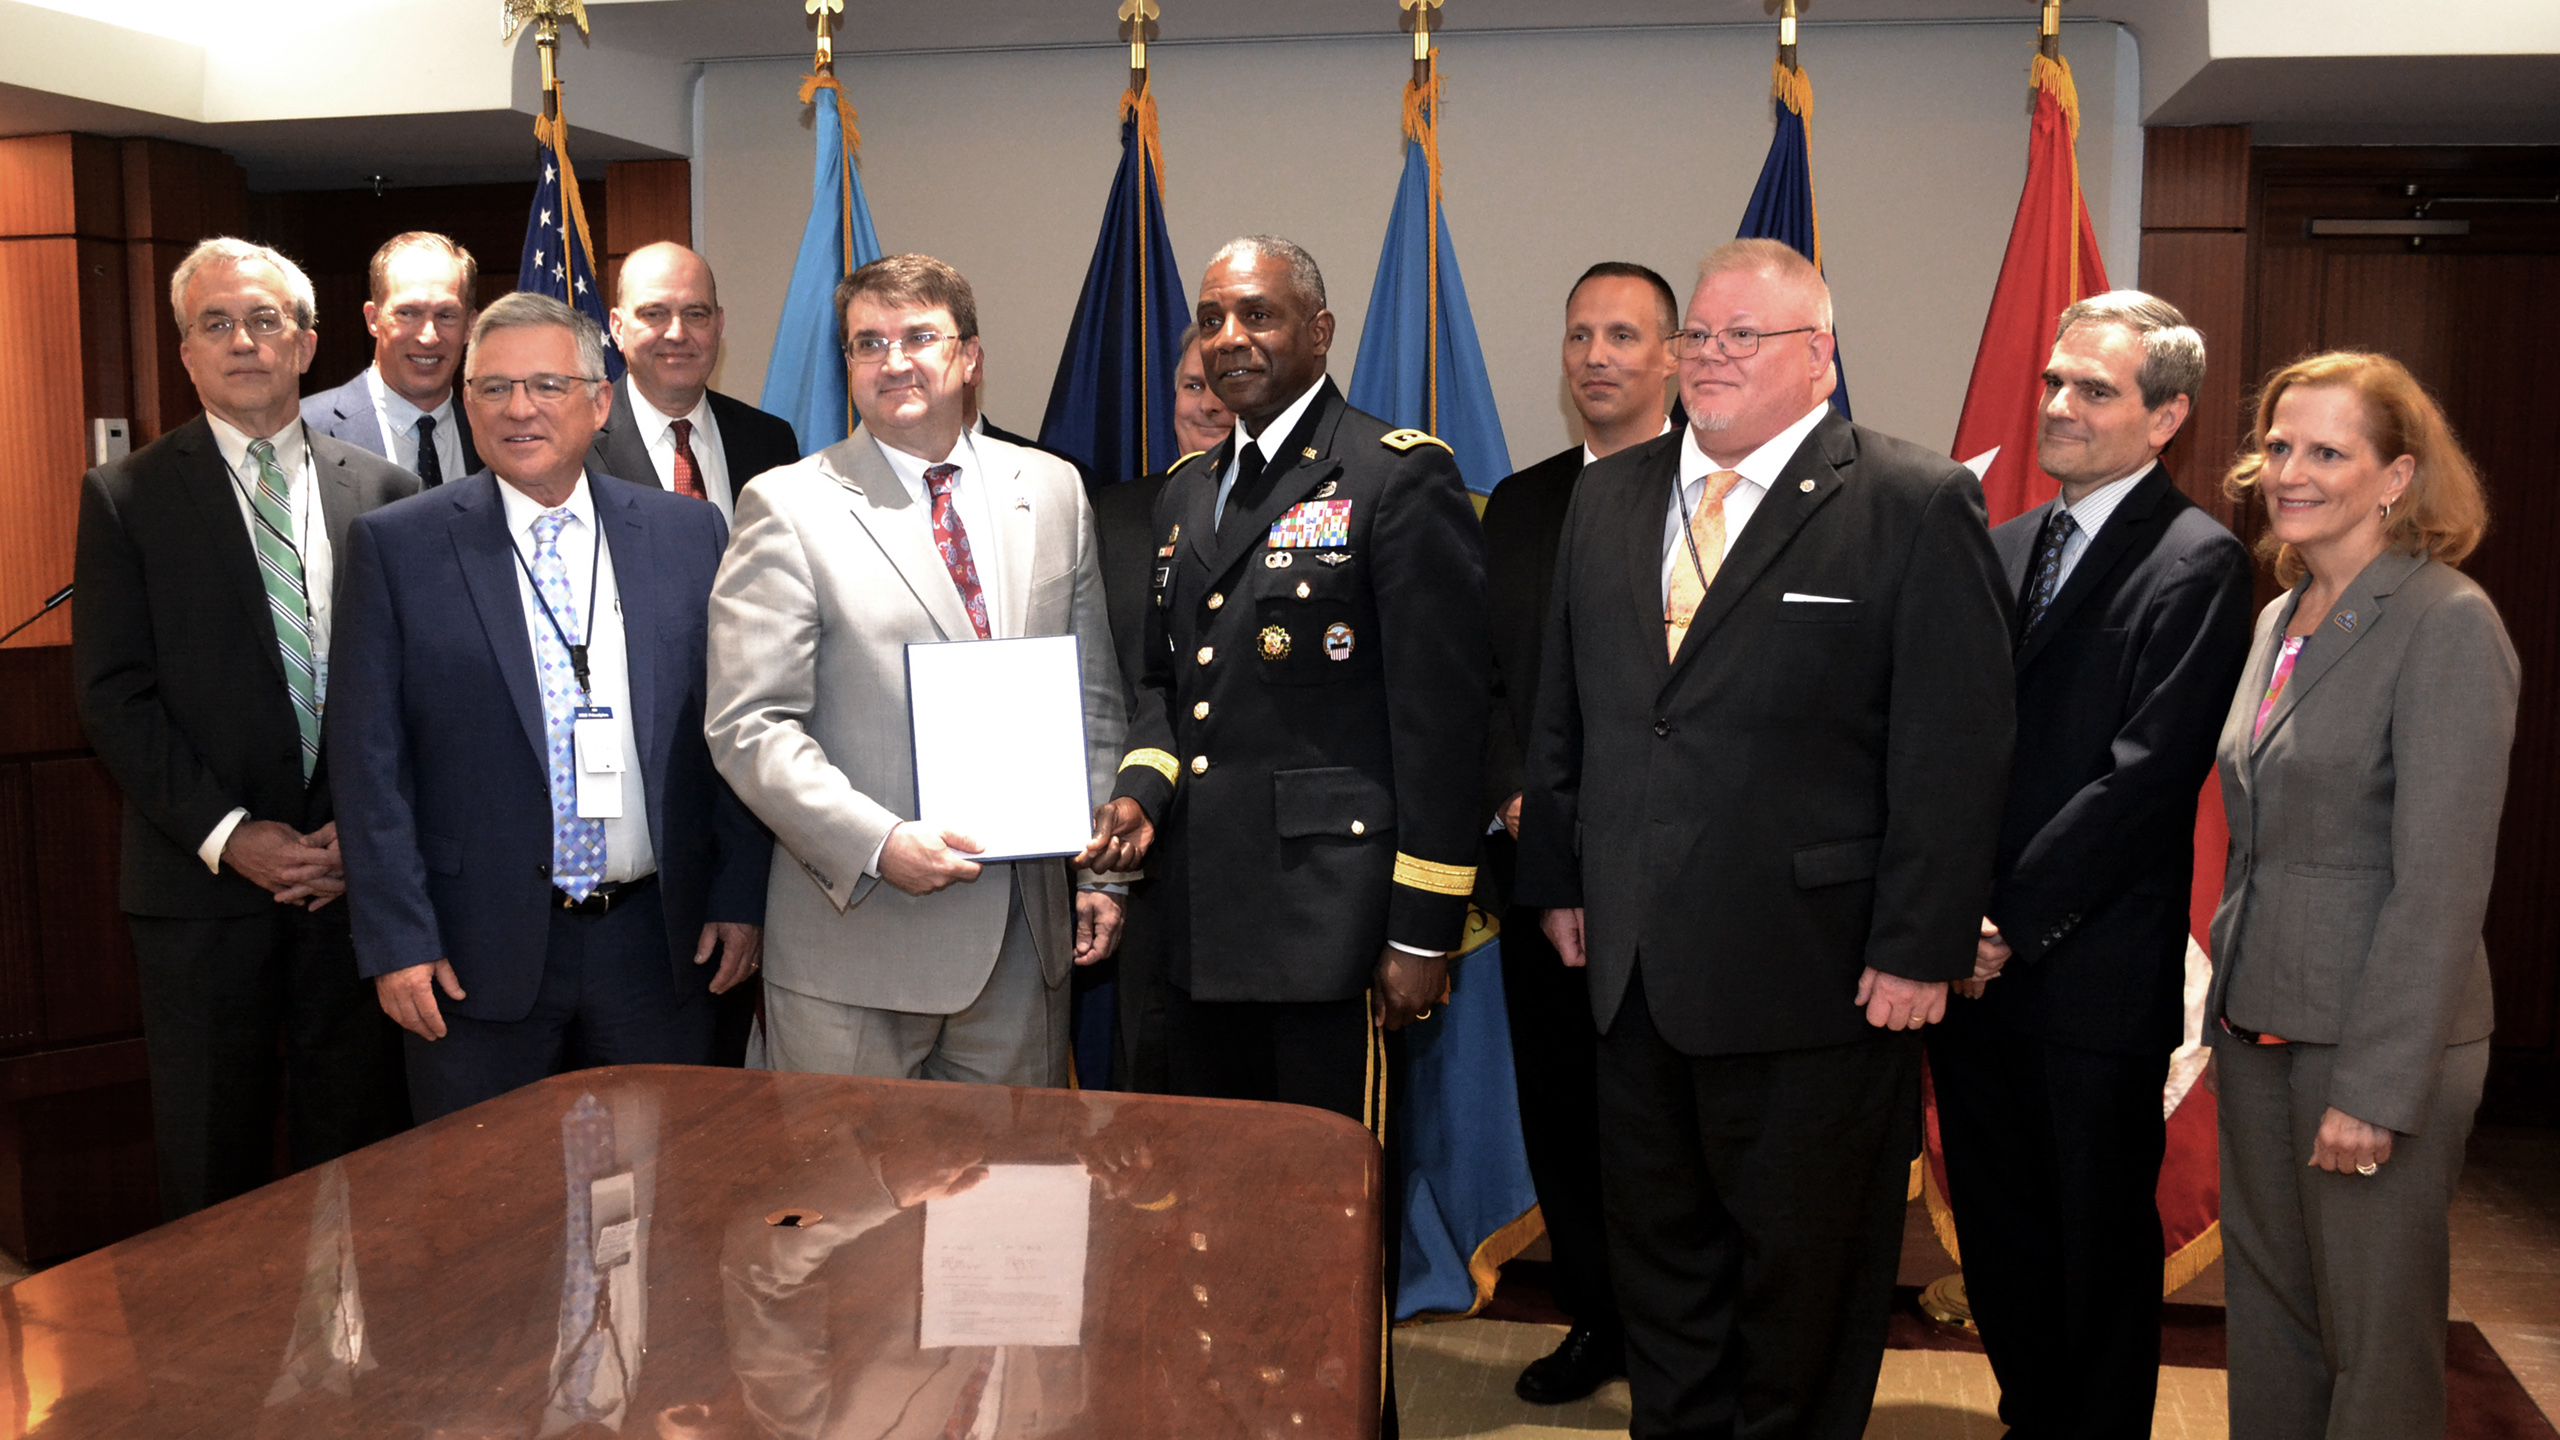 Department of Veterans Affairs Secretary Robert Wilkie (center left) and Defense Logistics Agency Director Army Lt. Gen. Darrell Williams (center right) display the newly signed interagency agreement between DLA and VA with the team who helped make it possible behind them at VA Headquarters in Washington, D.C., Aug. 12.